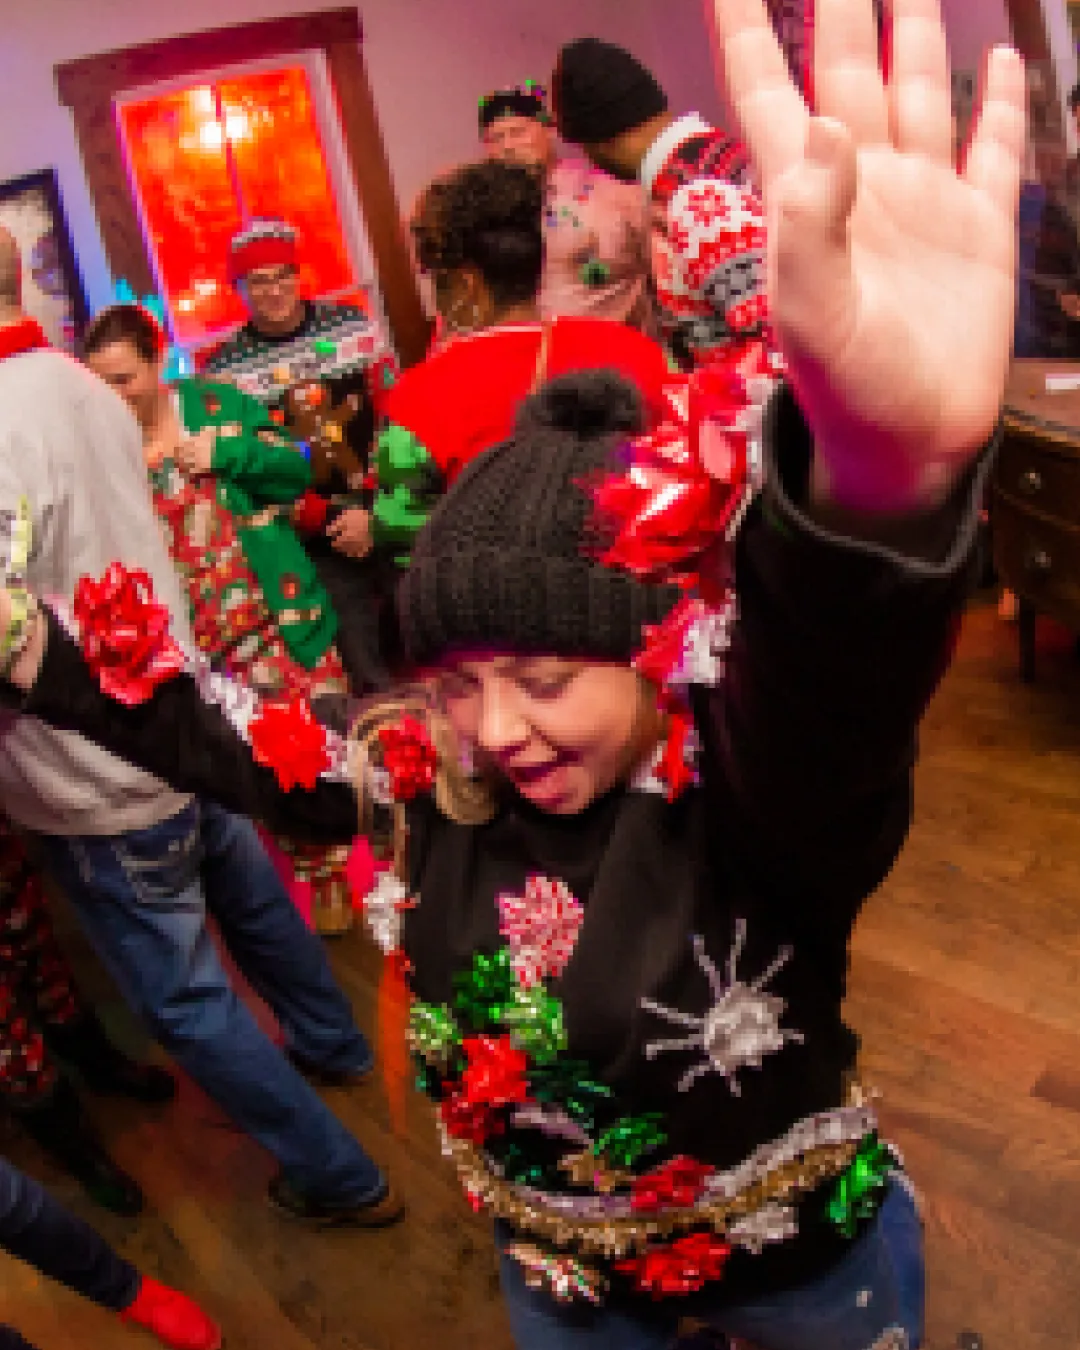 Merry and bright: festive folks rocking ugly sweaters at the bar crawl!